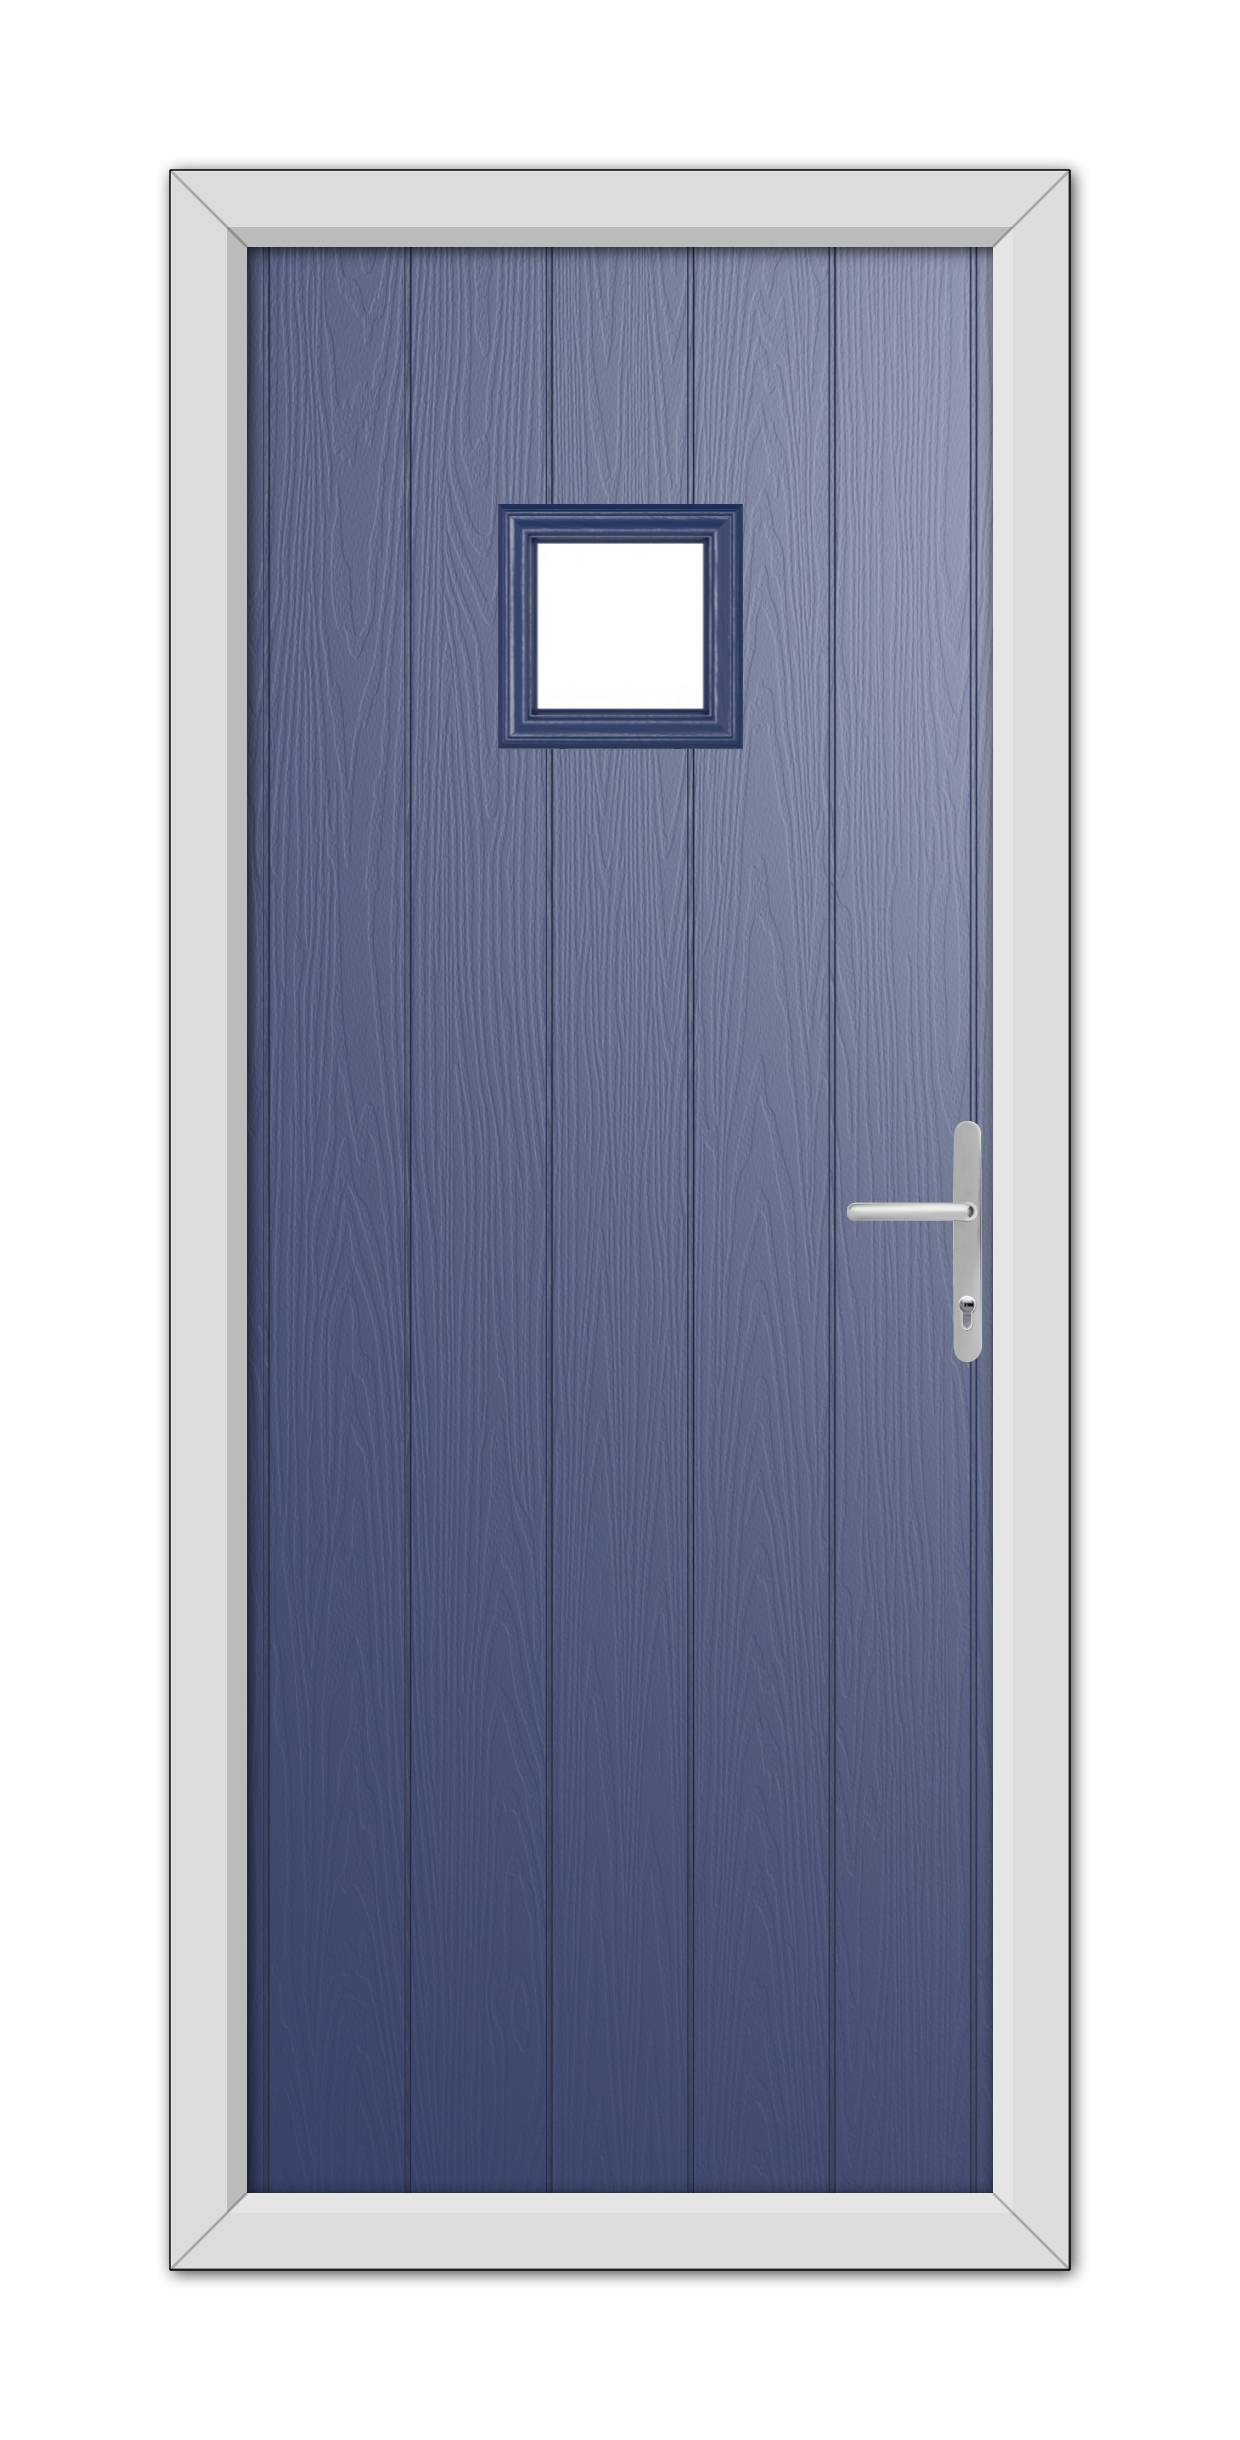 A modern Blue Brampton Composite Door 48mm Timber Core with a small rectangular window at the top, featuring a stainless steel handle and white frame.